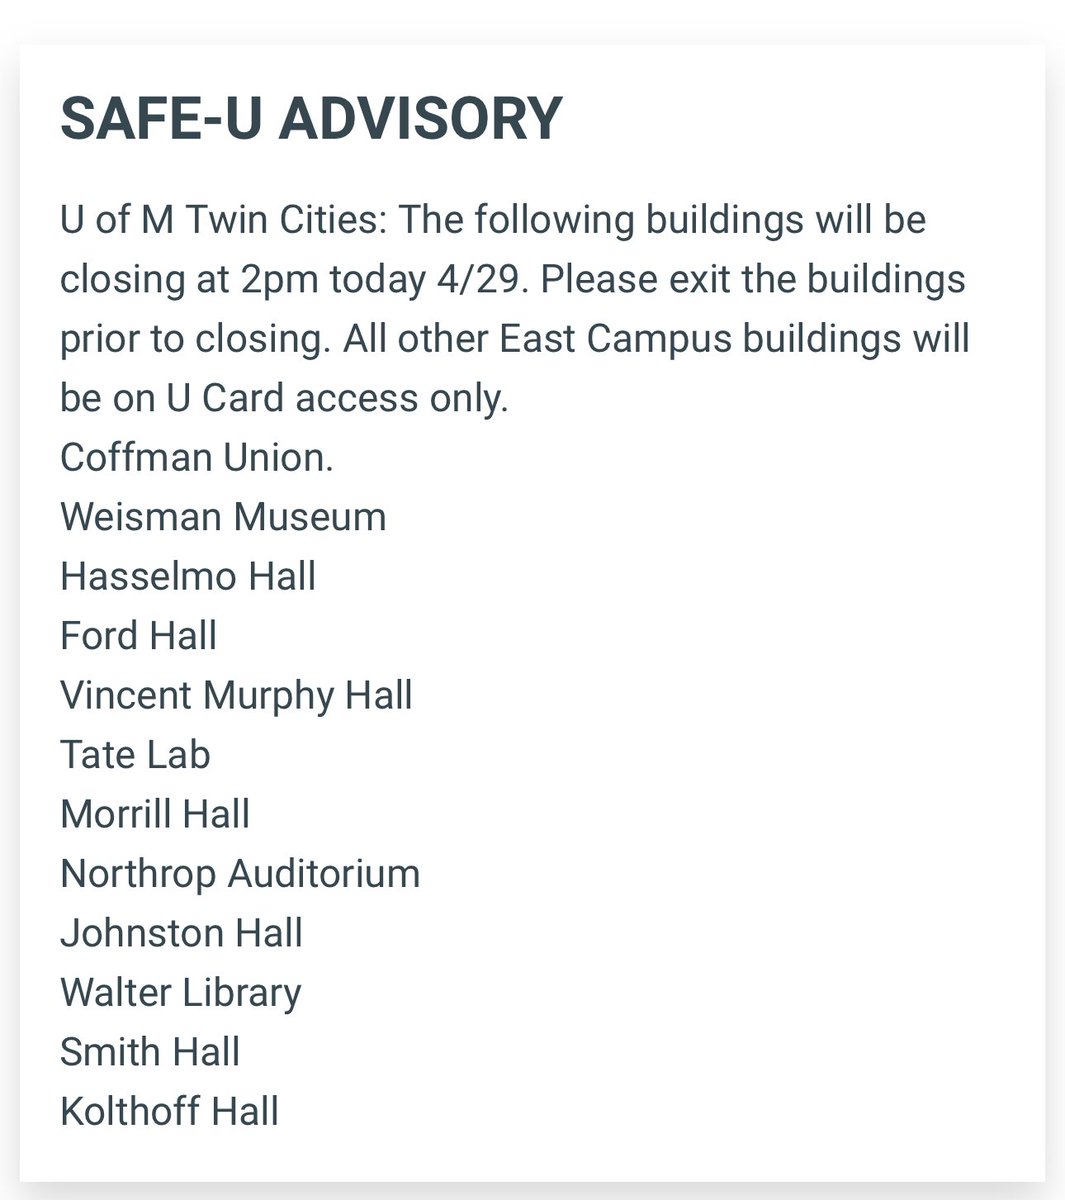 In response, U of Minnesota closed down twelve surrounding buildings, issued a “safety” advisory, and sent a campus-wide email claiming building closures were “to ensure the safety” of students and university workers.